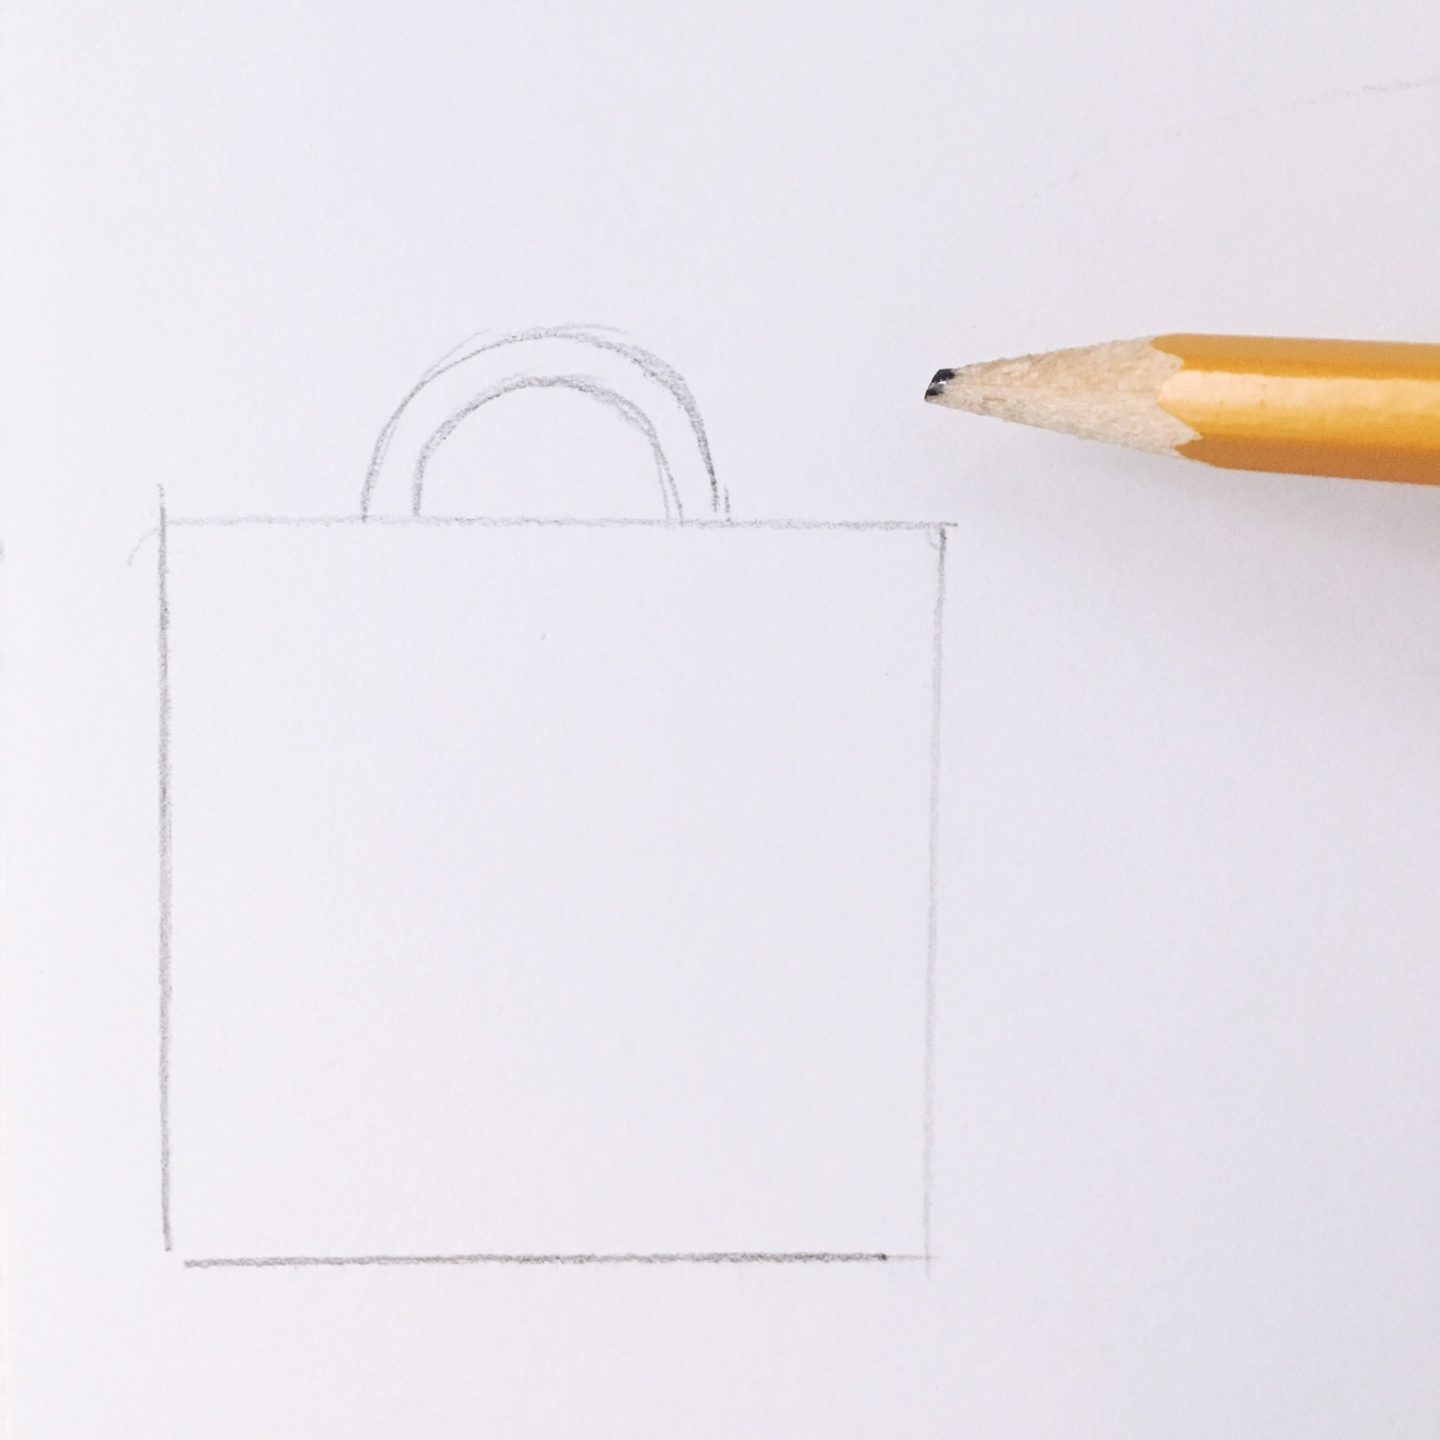 How To Draw A Purse Step By Step Literacy Basics